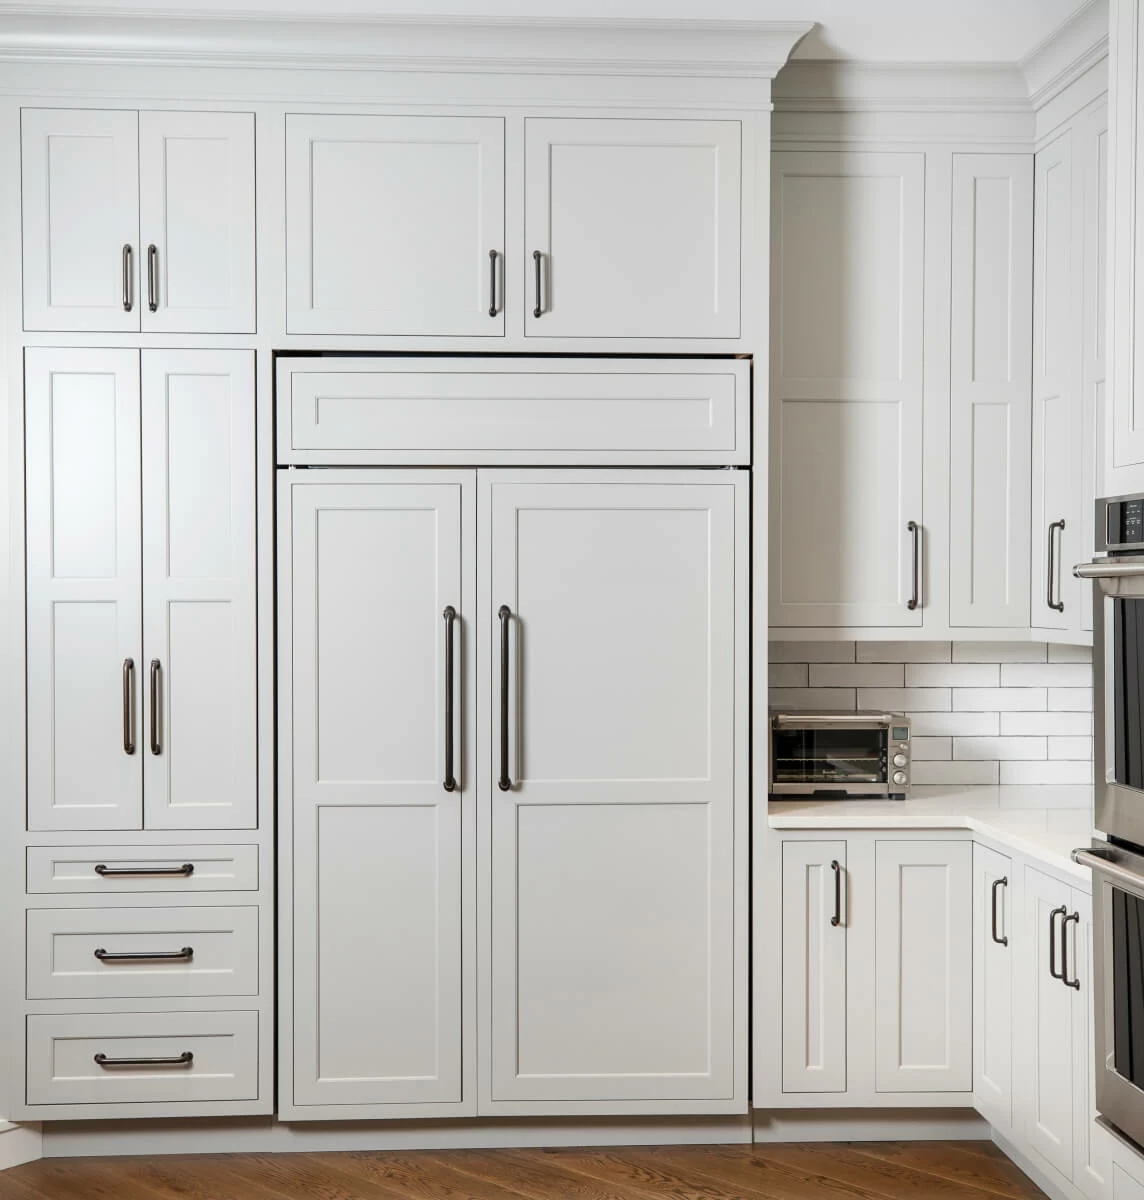 How to Hide Your Refrigerator In Plain Sight with Appliance Panels